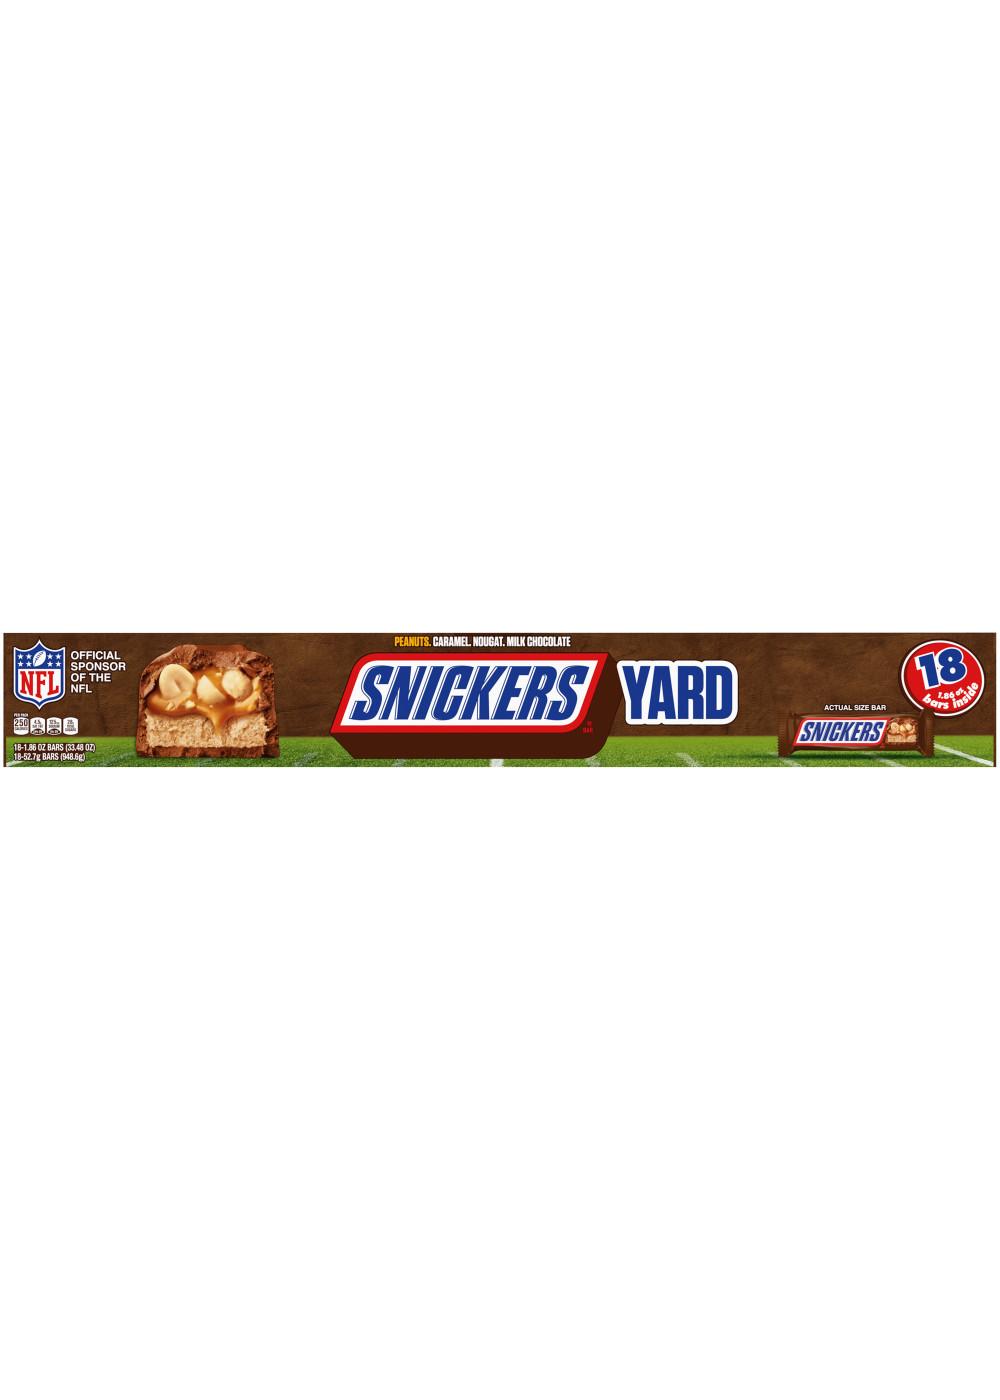 Snickers Yard Full Size Chocolate Candy Bars; image 1 of 7